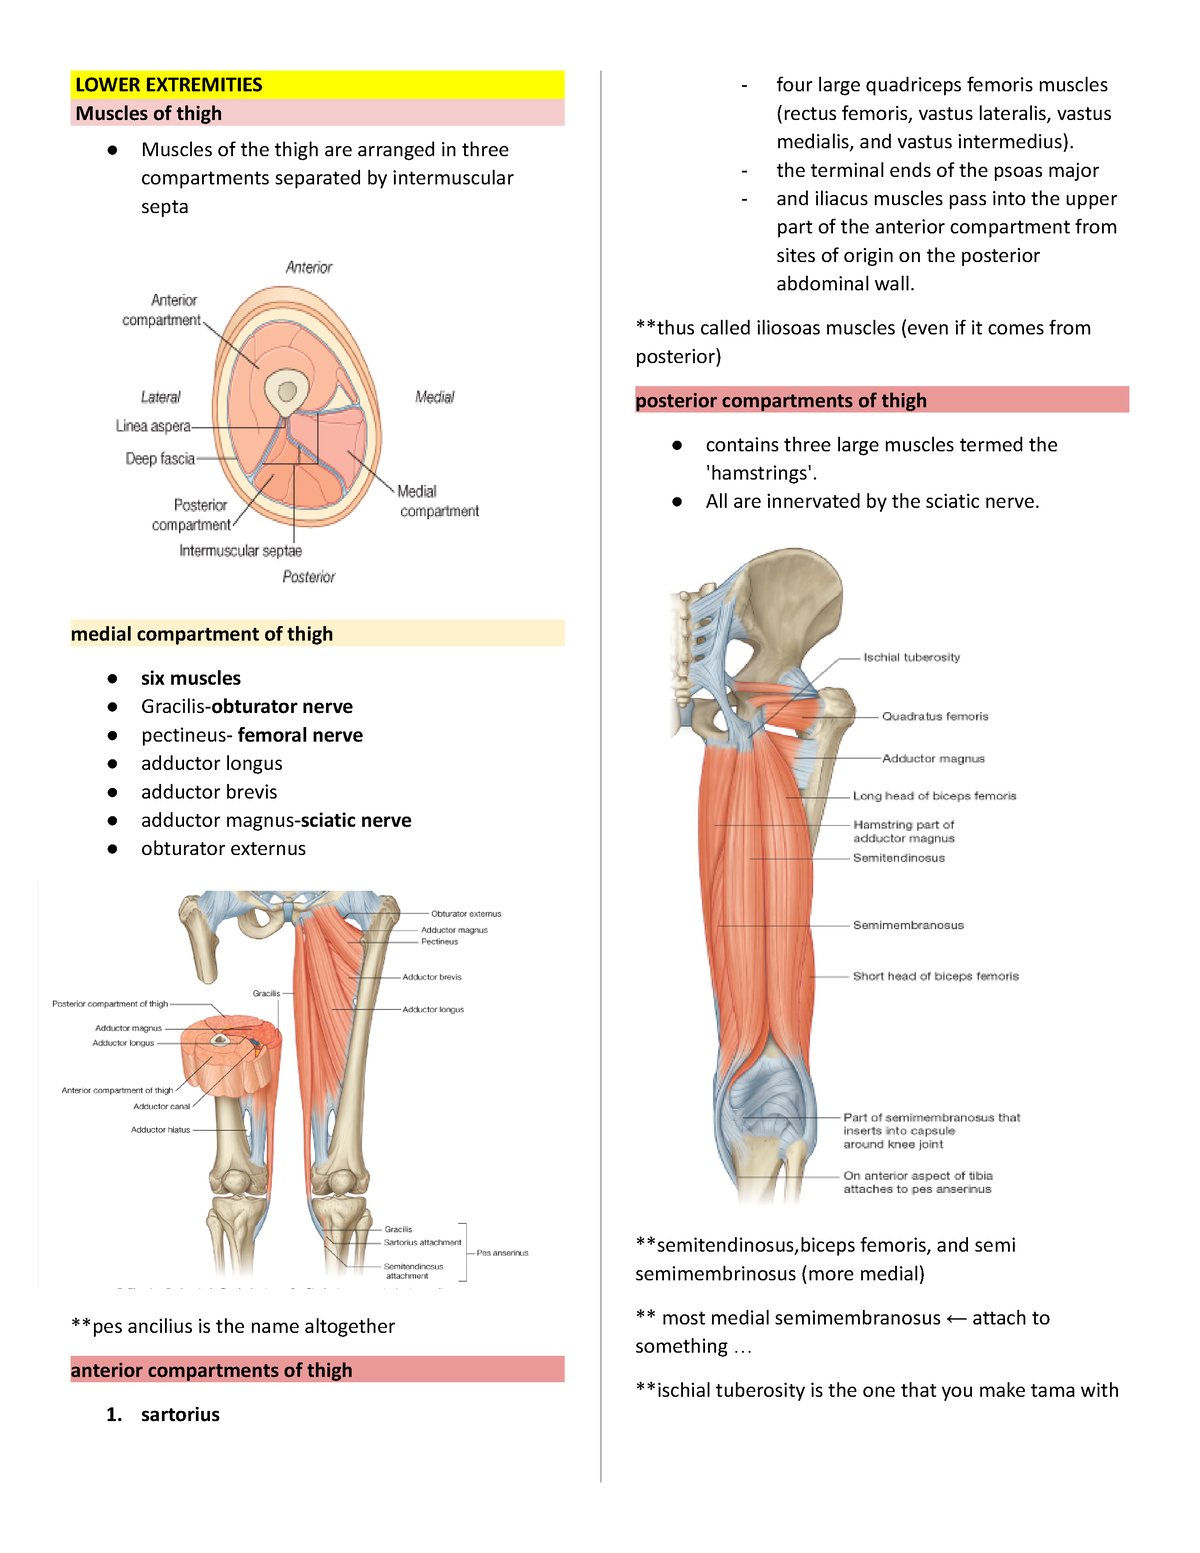 General anatomy muscles and nerves - LOWER EXTREMITIES Muscles of thigh ...